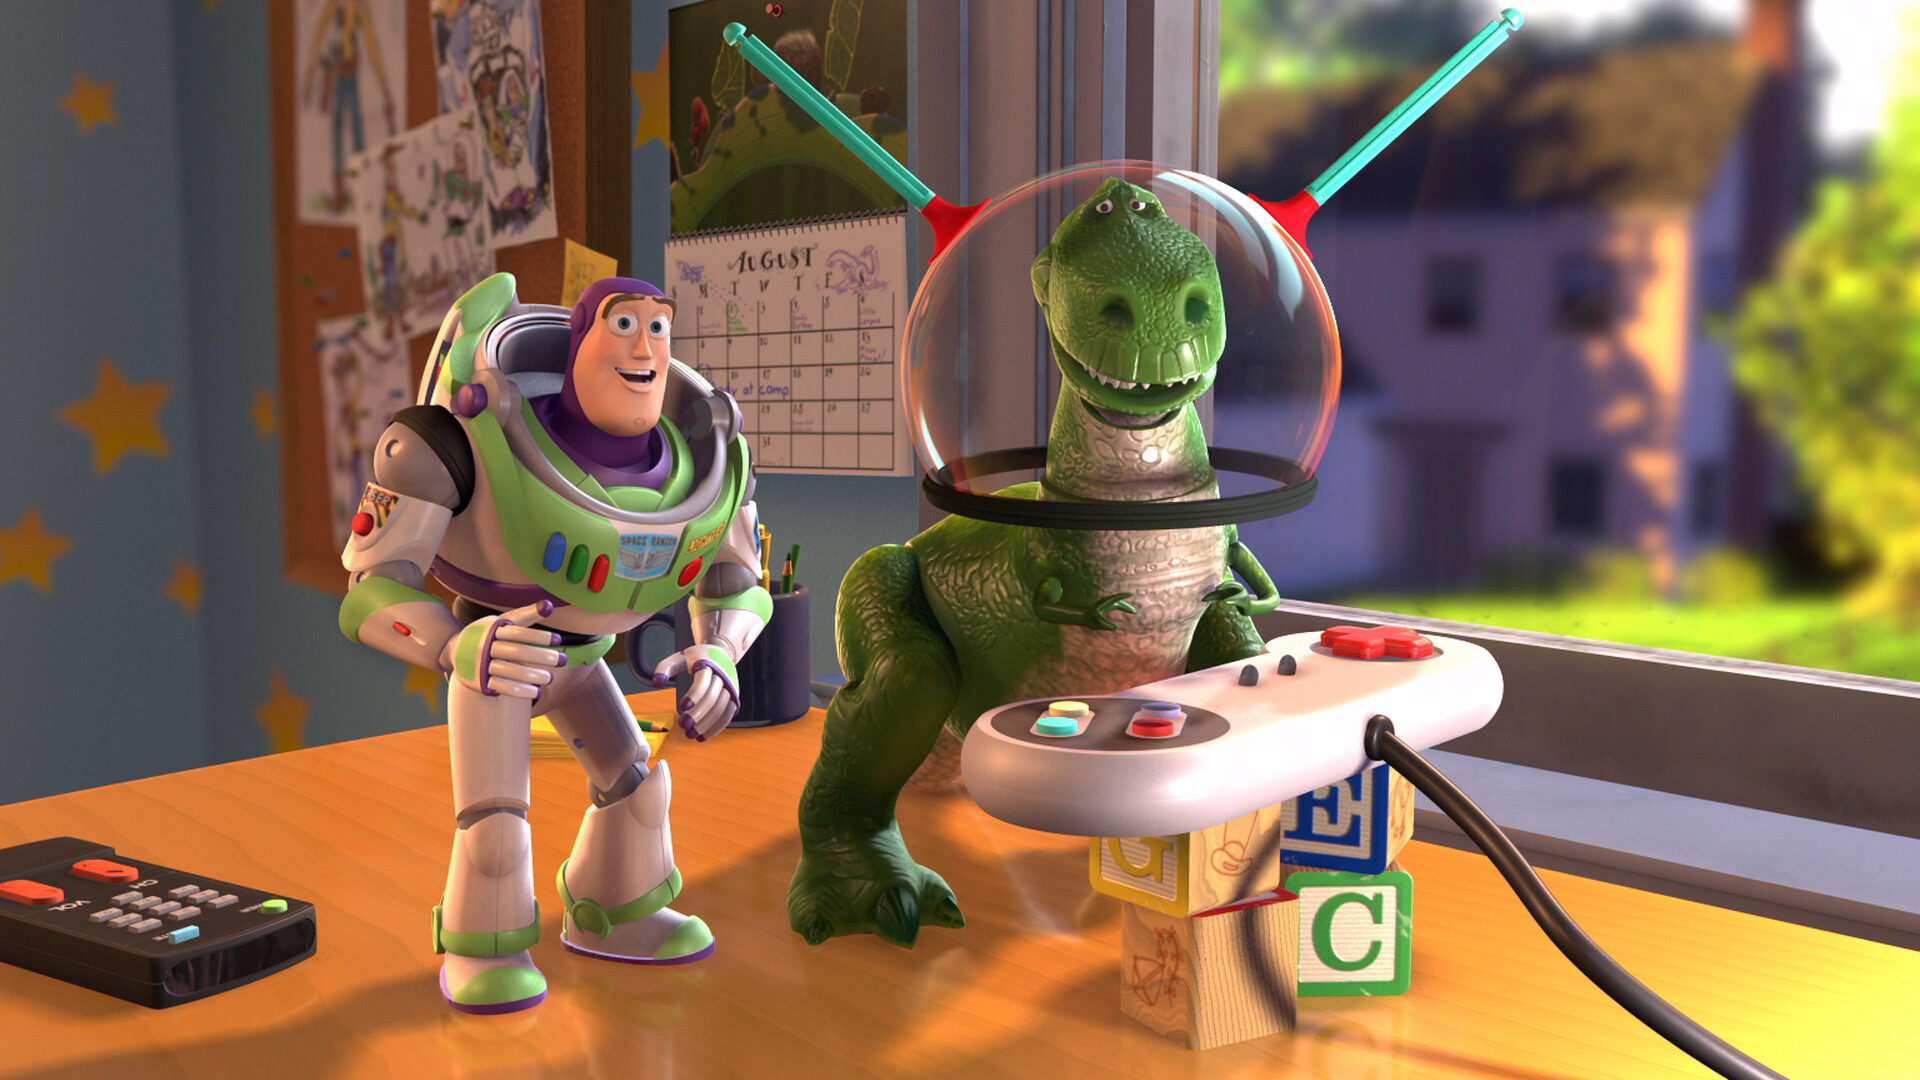 Toy Story: Tim Allen as Buzz Lightyear and Wallace Shawn as Rex. 1920x1080 Full HD Wallpaper.